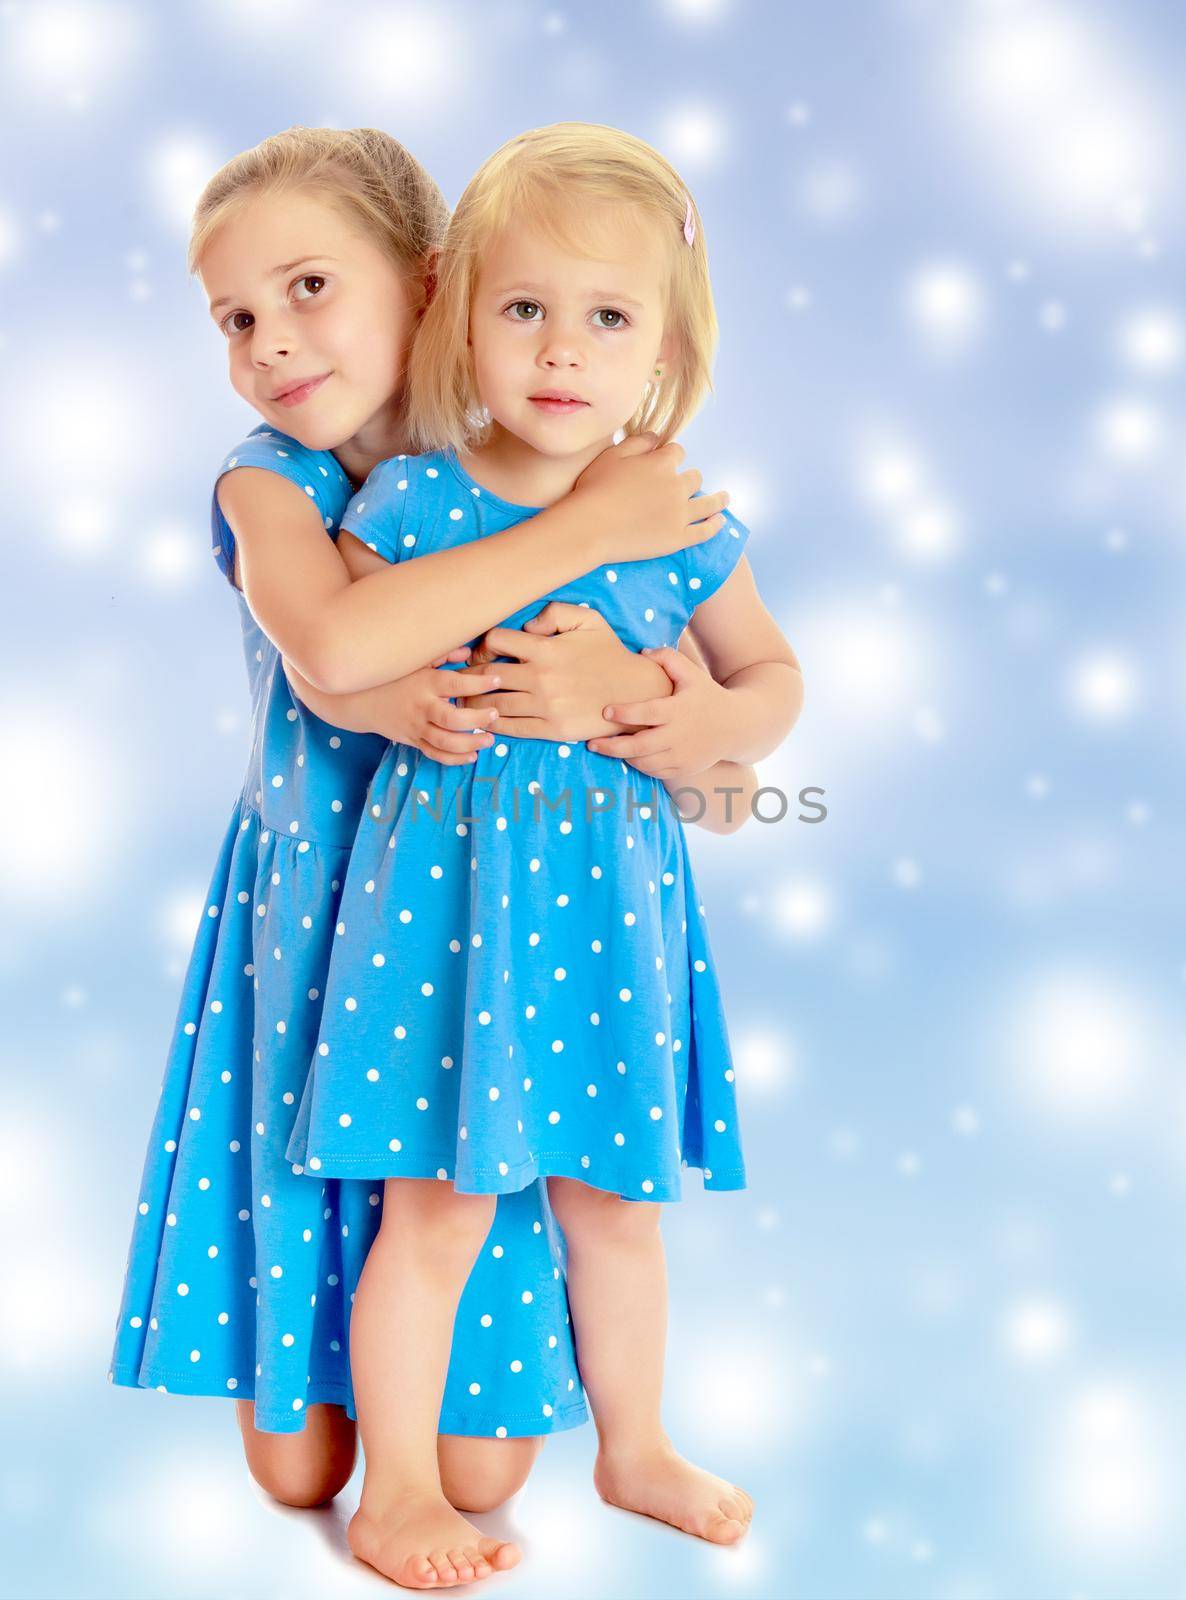 Two charming little girls, sisters , in identical blue dresses with polka dots , cuddling.On a blue background with large, white, Christmas or new year's snowflakes.